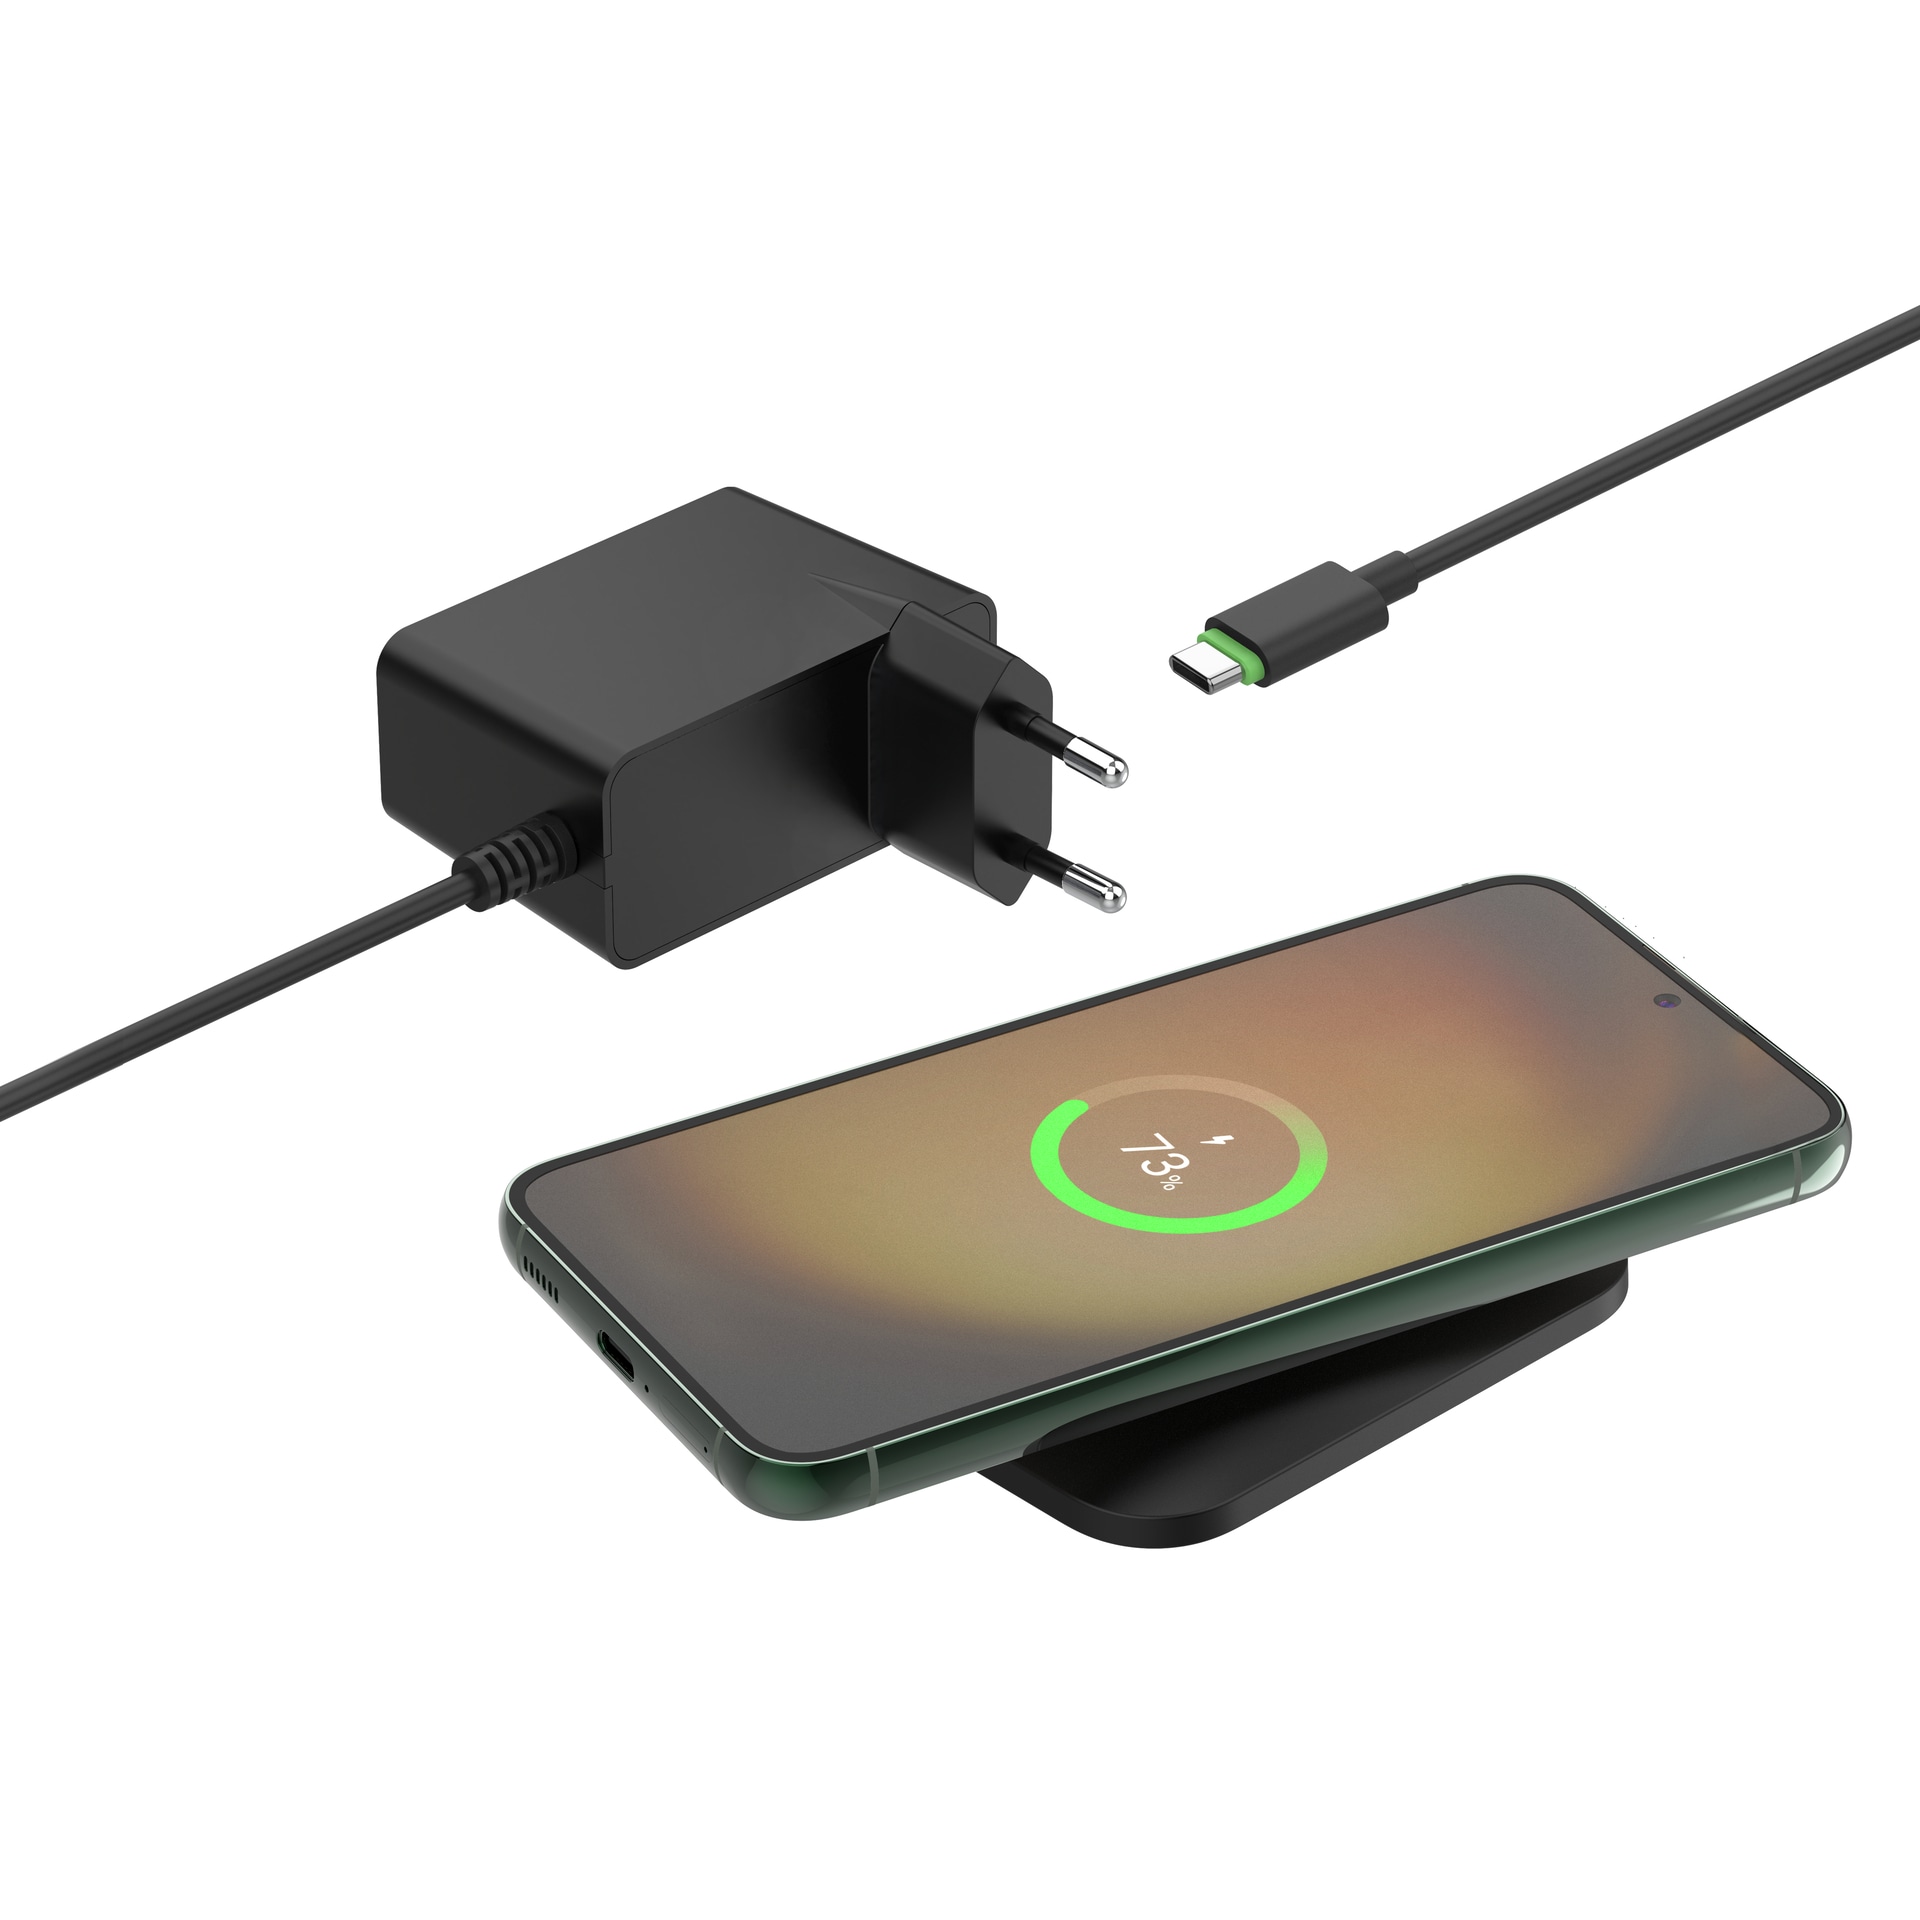 Belkin Wireless Charger »BOOST CHARGE PRO kabelloses Ladepad 15W + Netzteil, b«